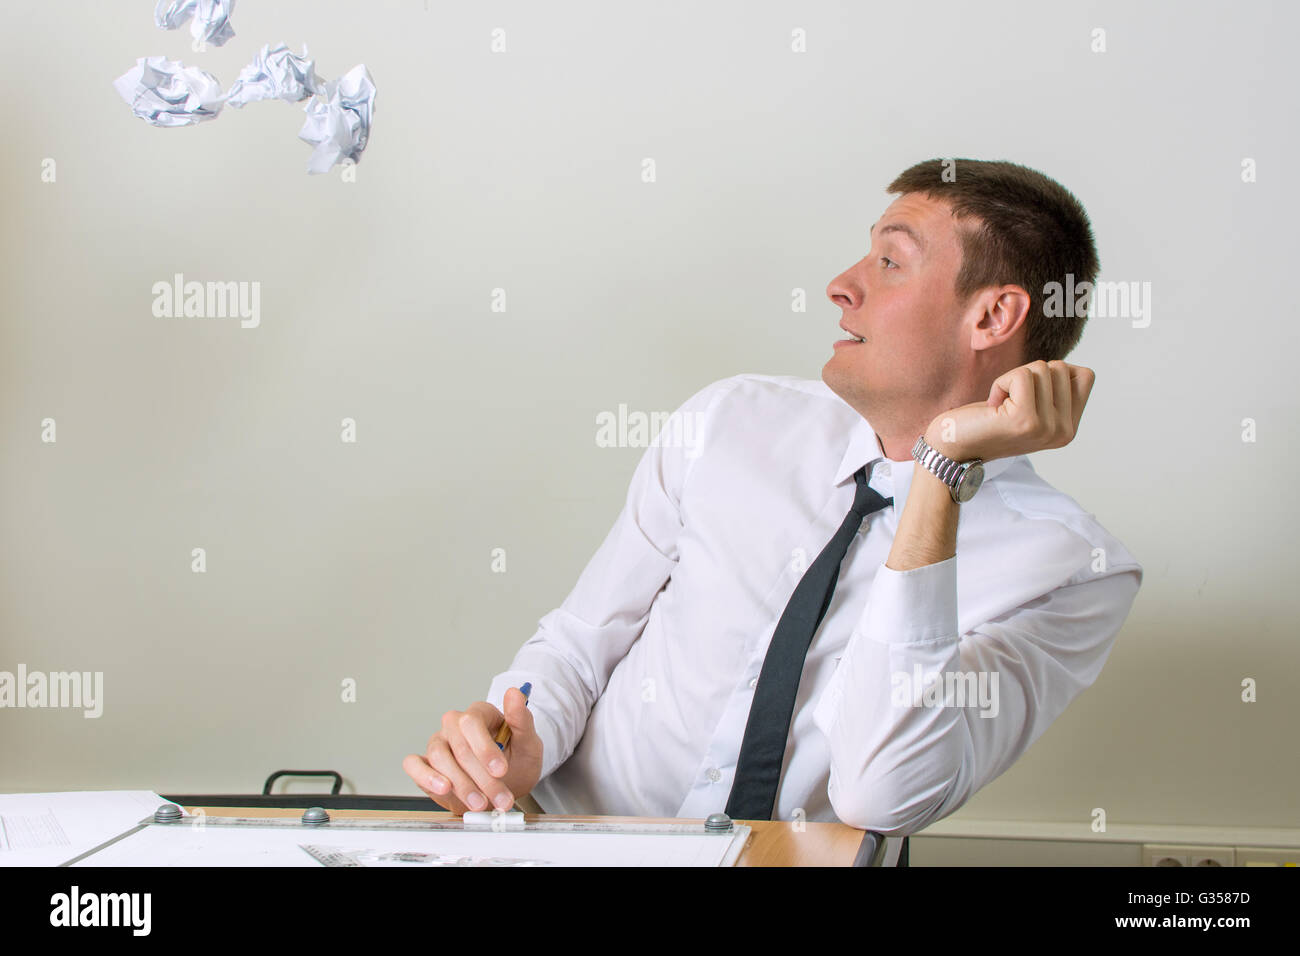 Crumpled papers flying into young businessman face Stock Photo